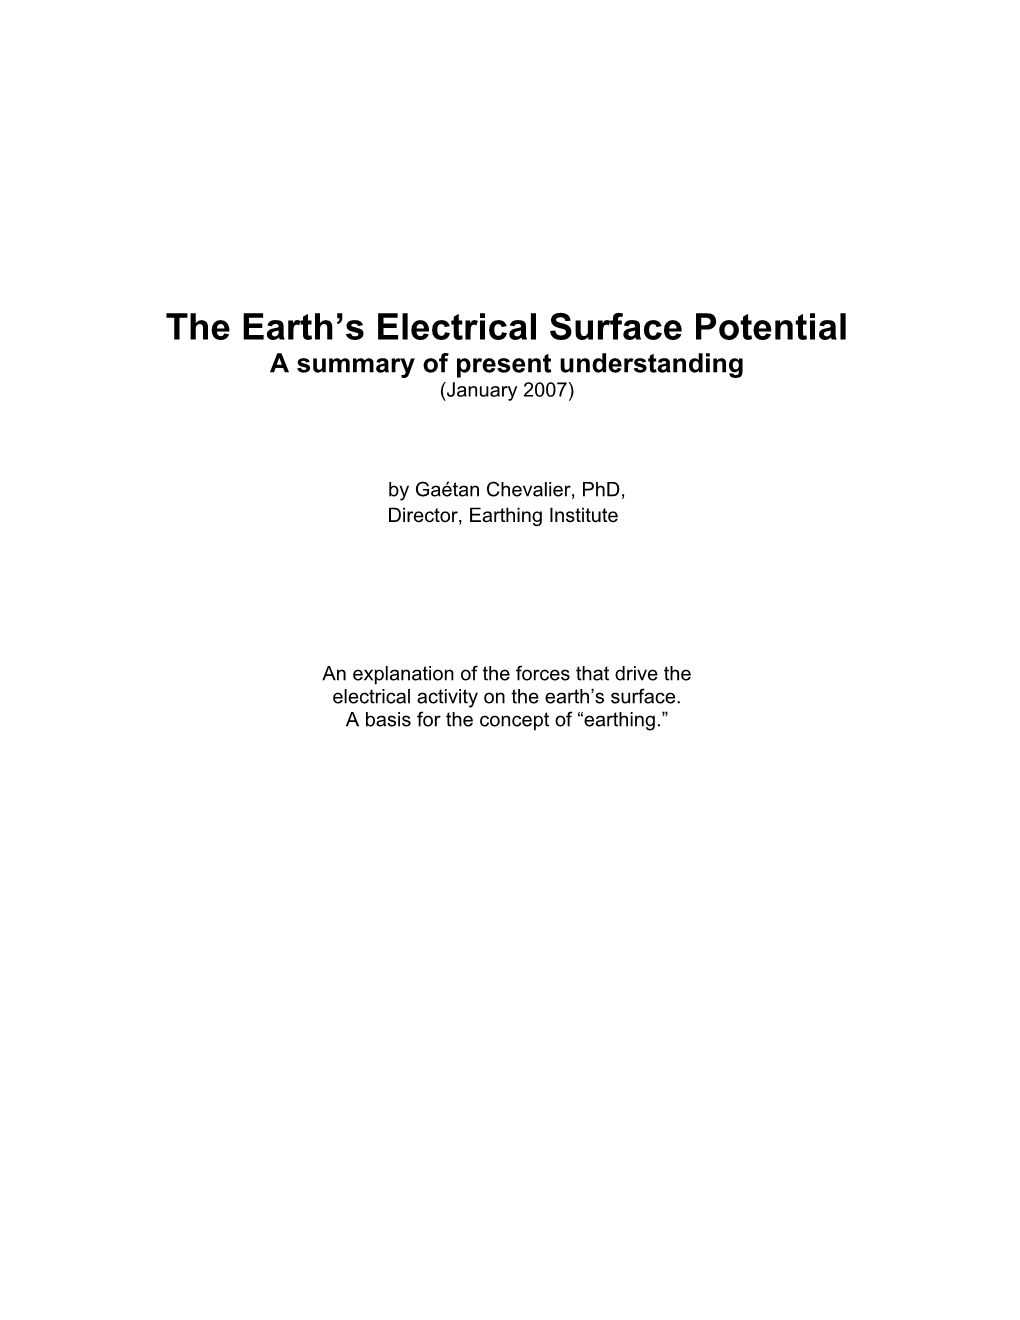 The Earth's Electrical Surface Potential